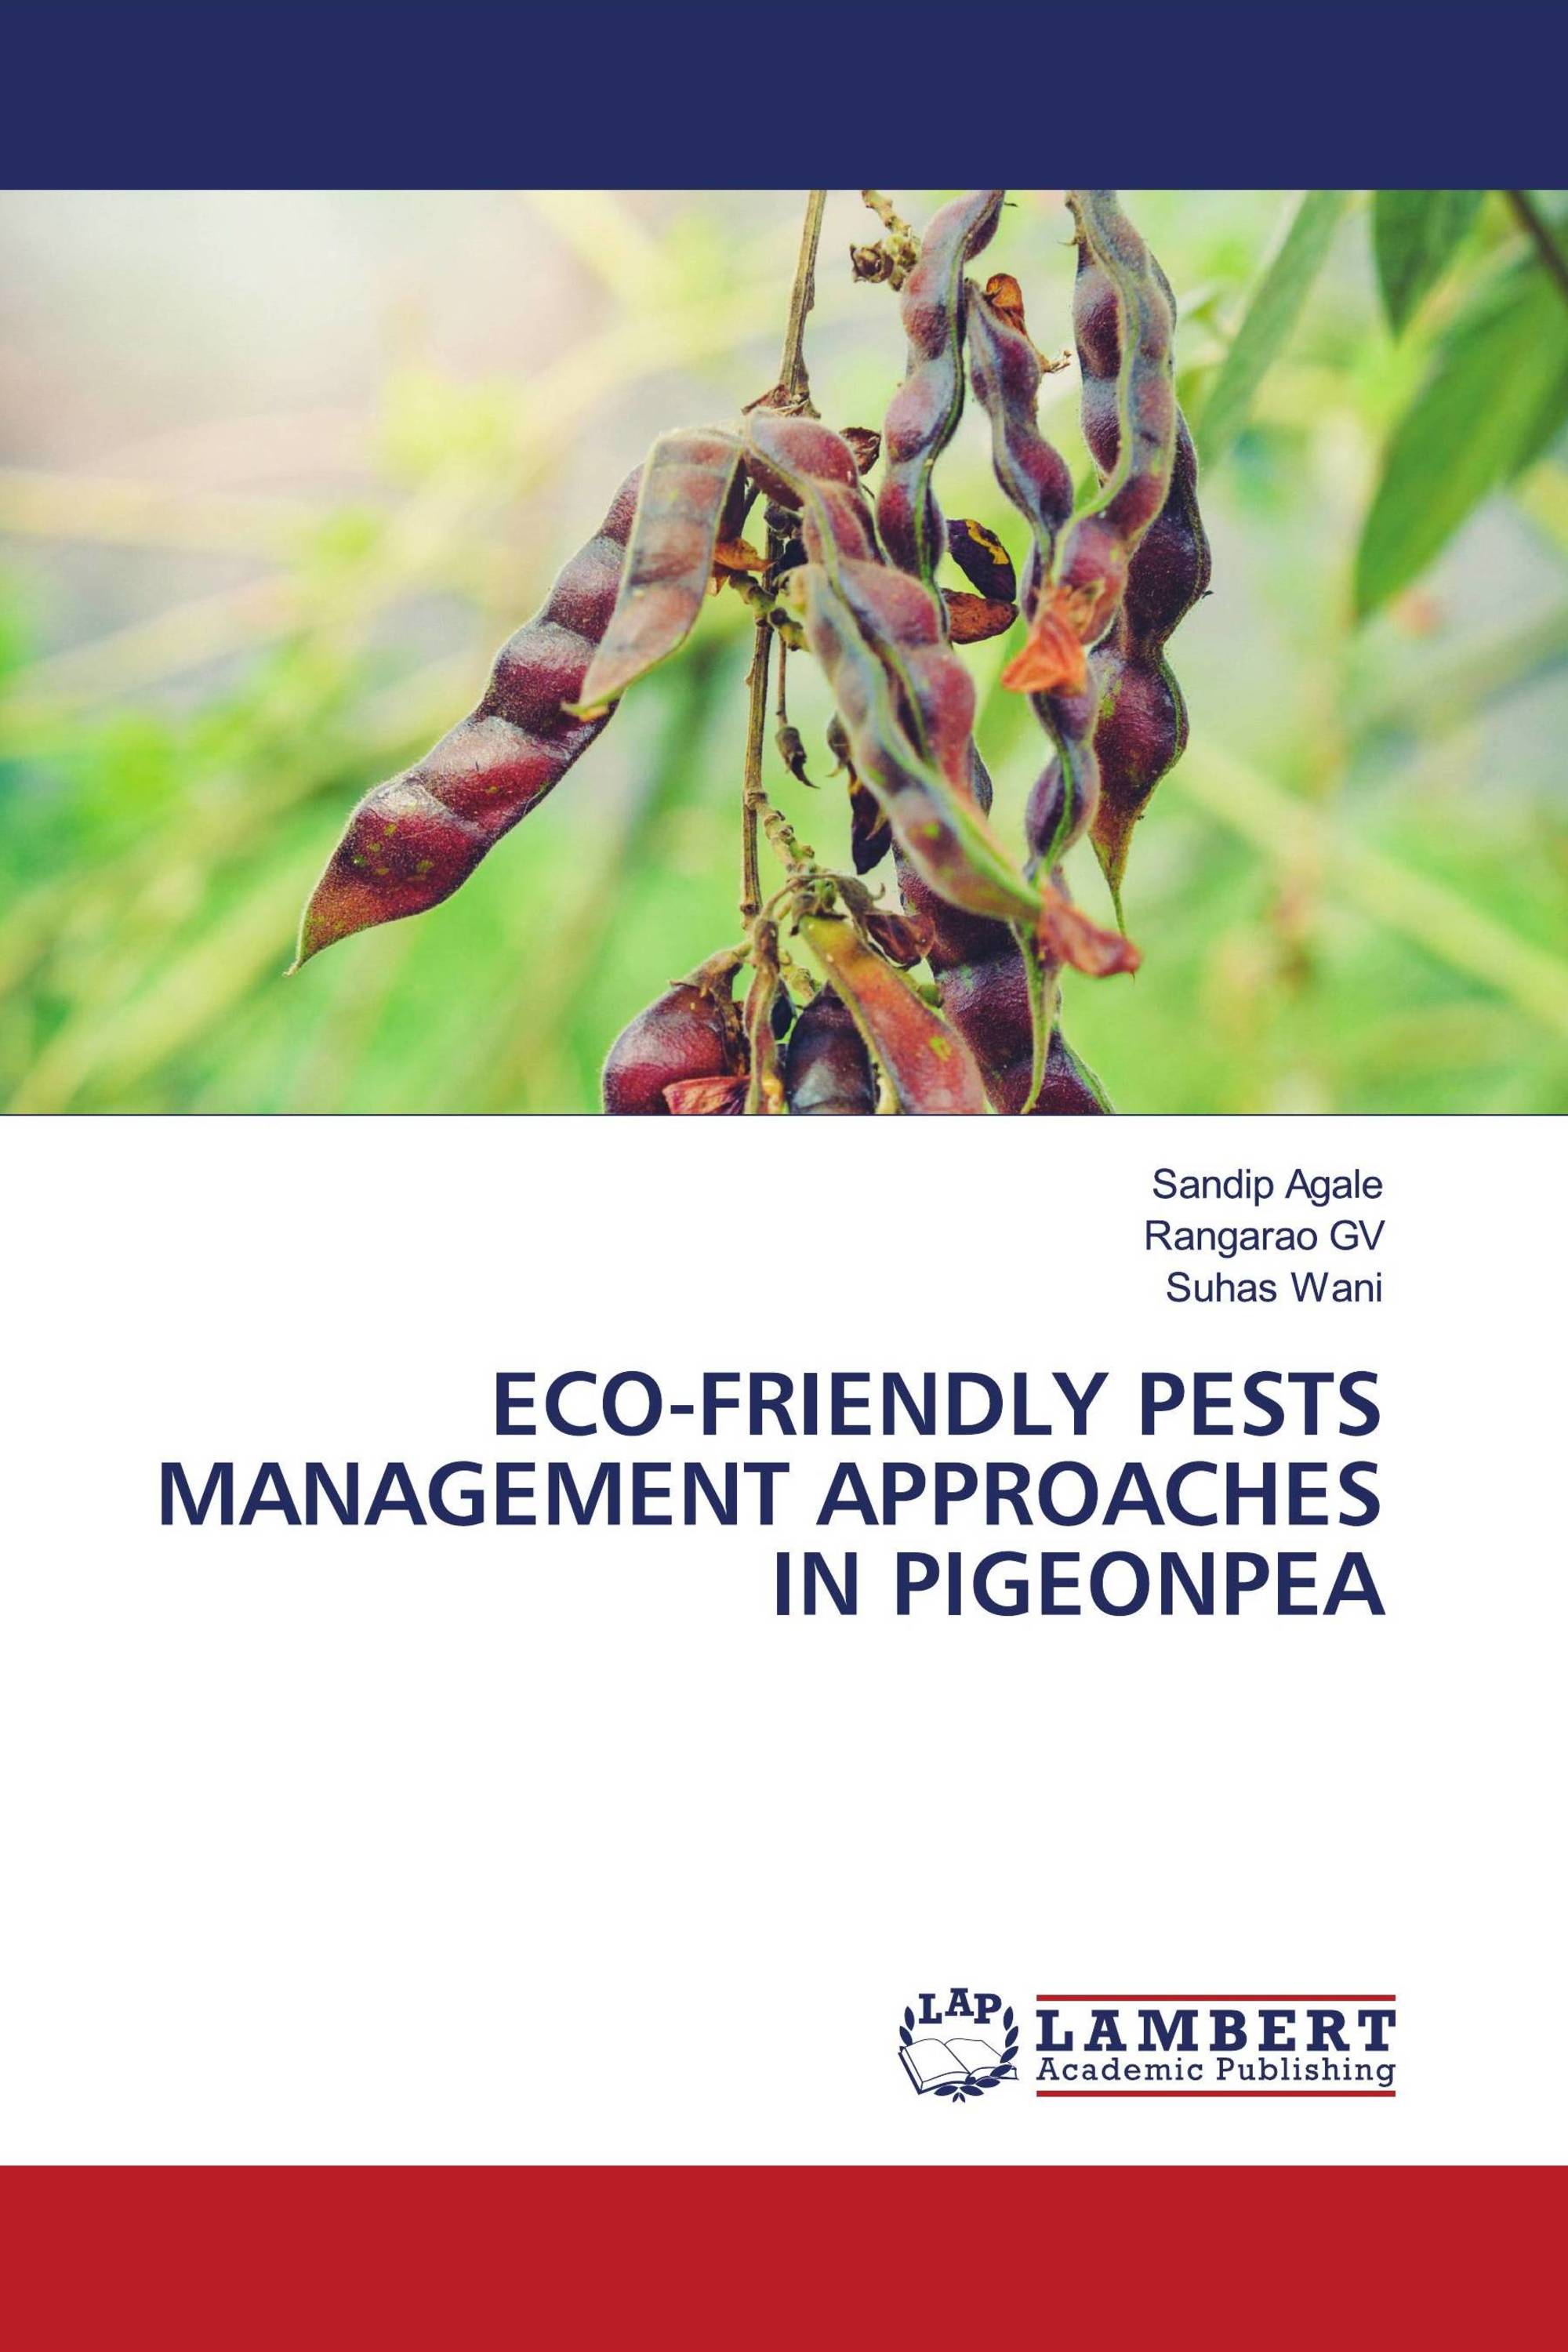 ECO-FRIENDLY PESTS MANAGEMENT APPROACHES IN PIGEONPEA